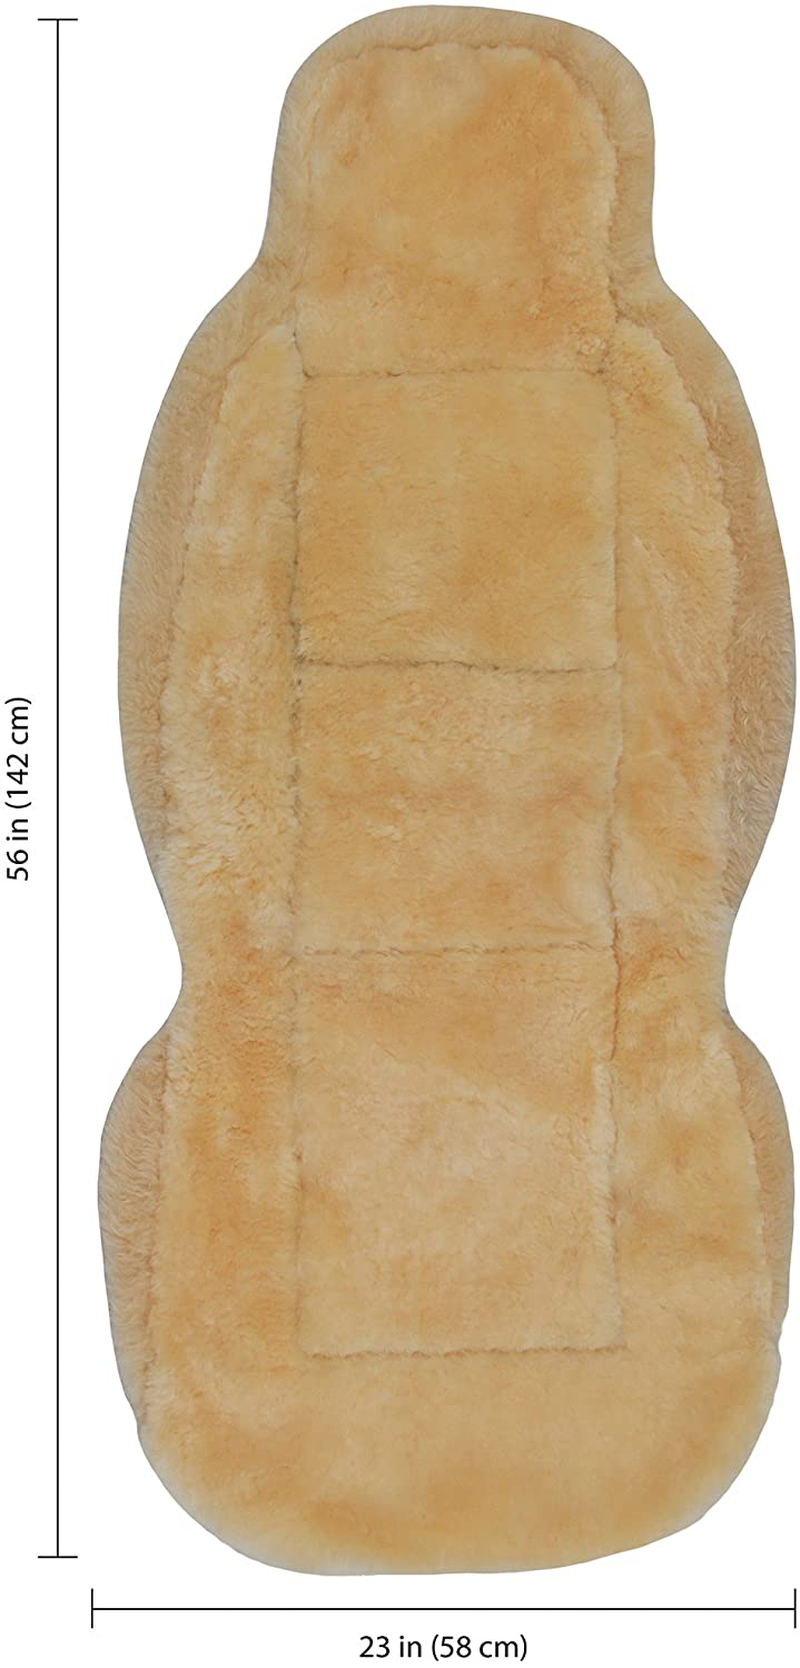 Eurow Sheepskin Seat Cover, 56 by 23 Inches, Champagne